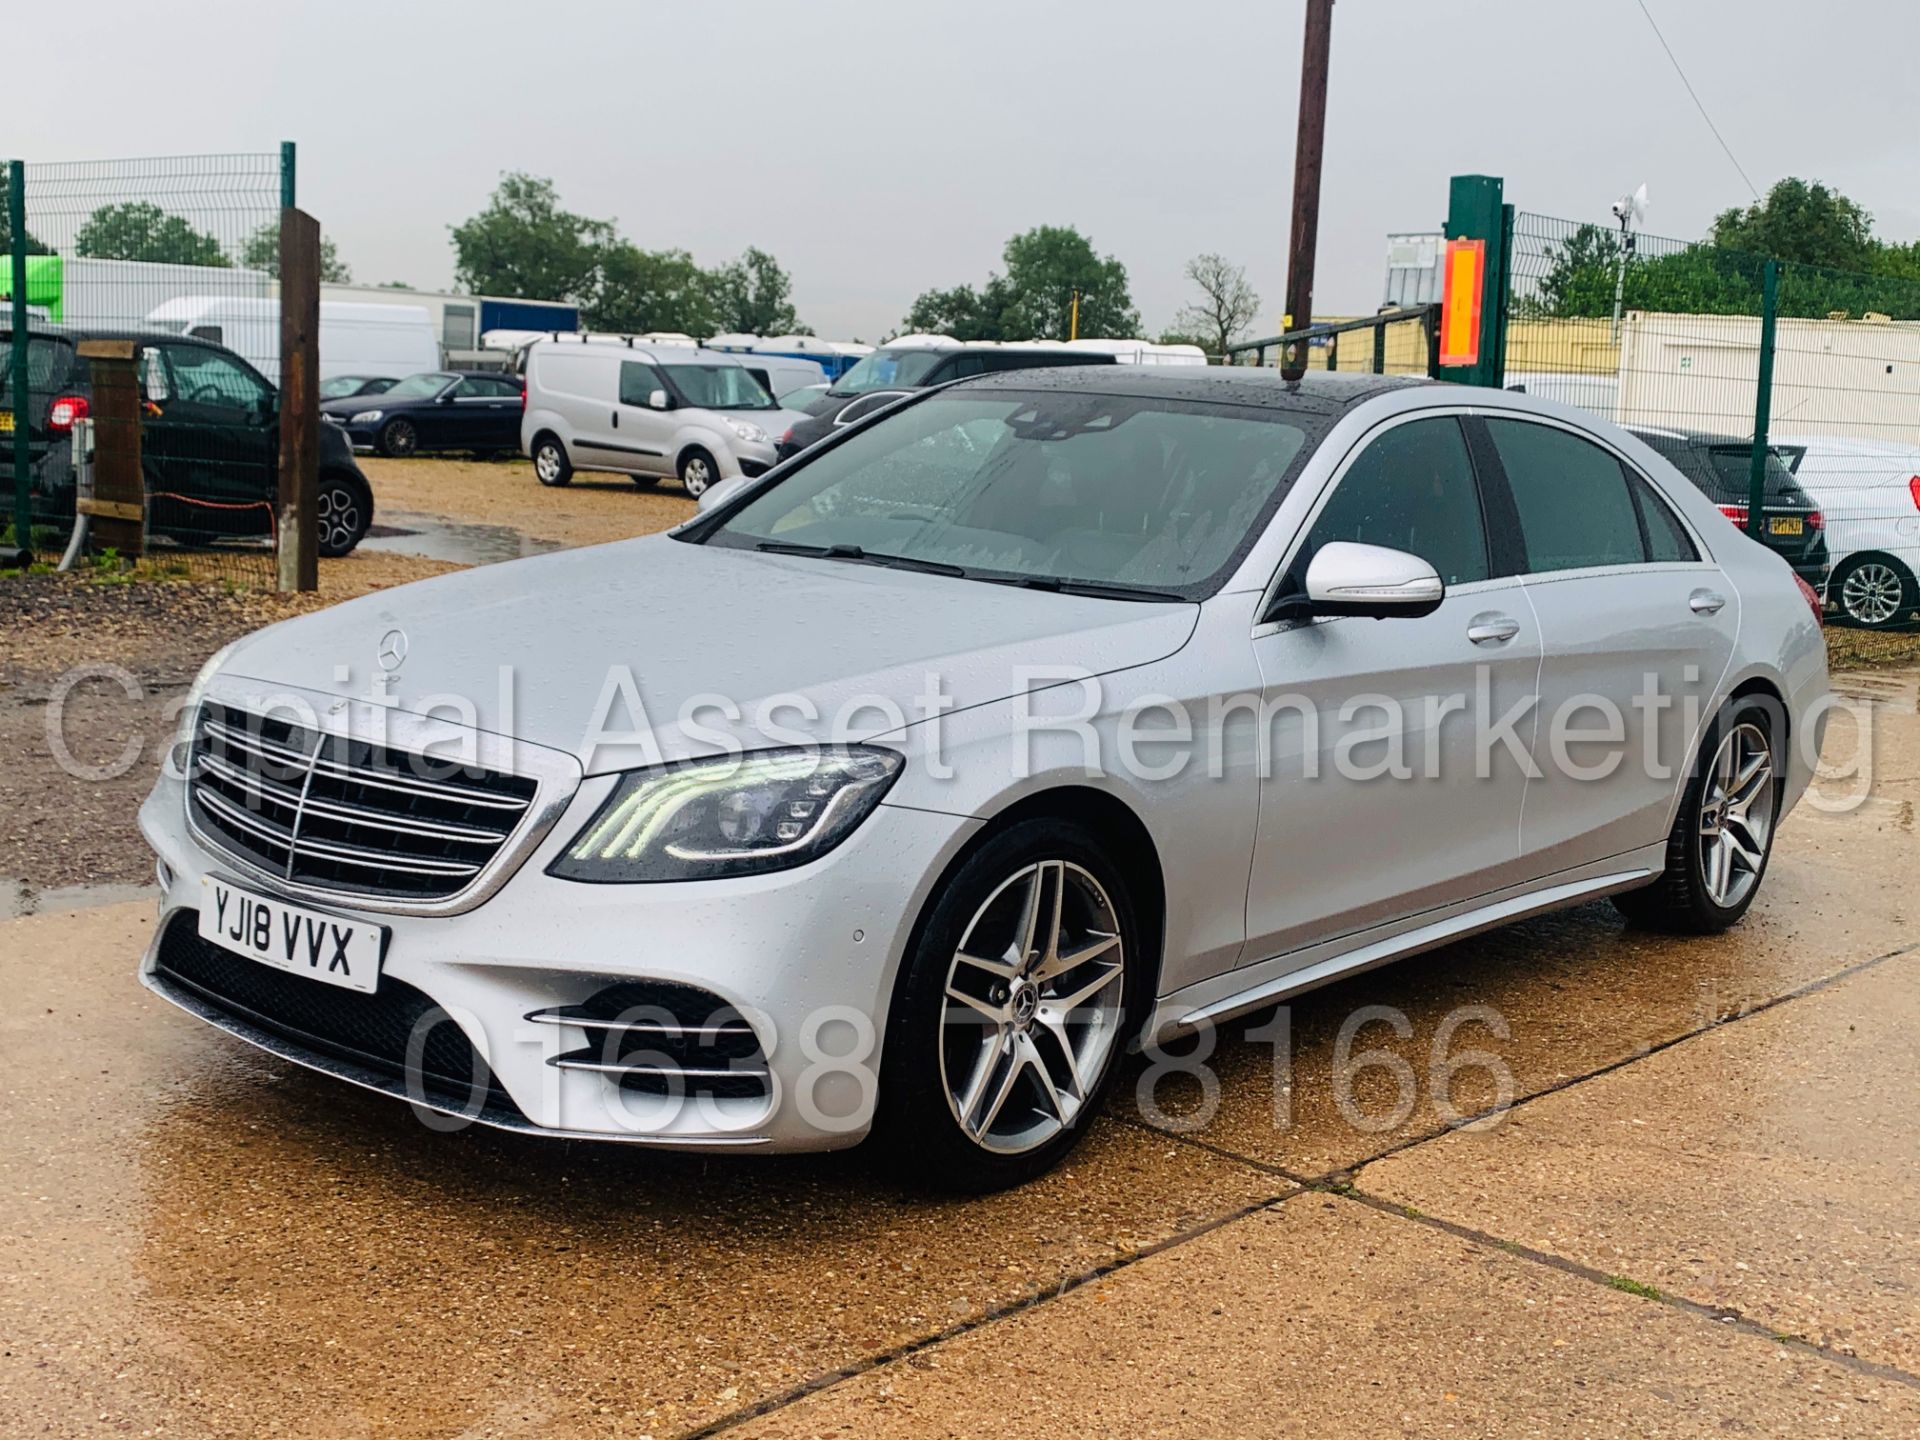 MERCEDES-BENZ S350D LWB *AMG LINE - EXECUTIVE PREMIUM SALOON* (2018) 9-G TRONIC *TOP OF THE RANGE* - Image 6 of 71